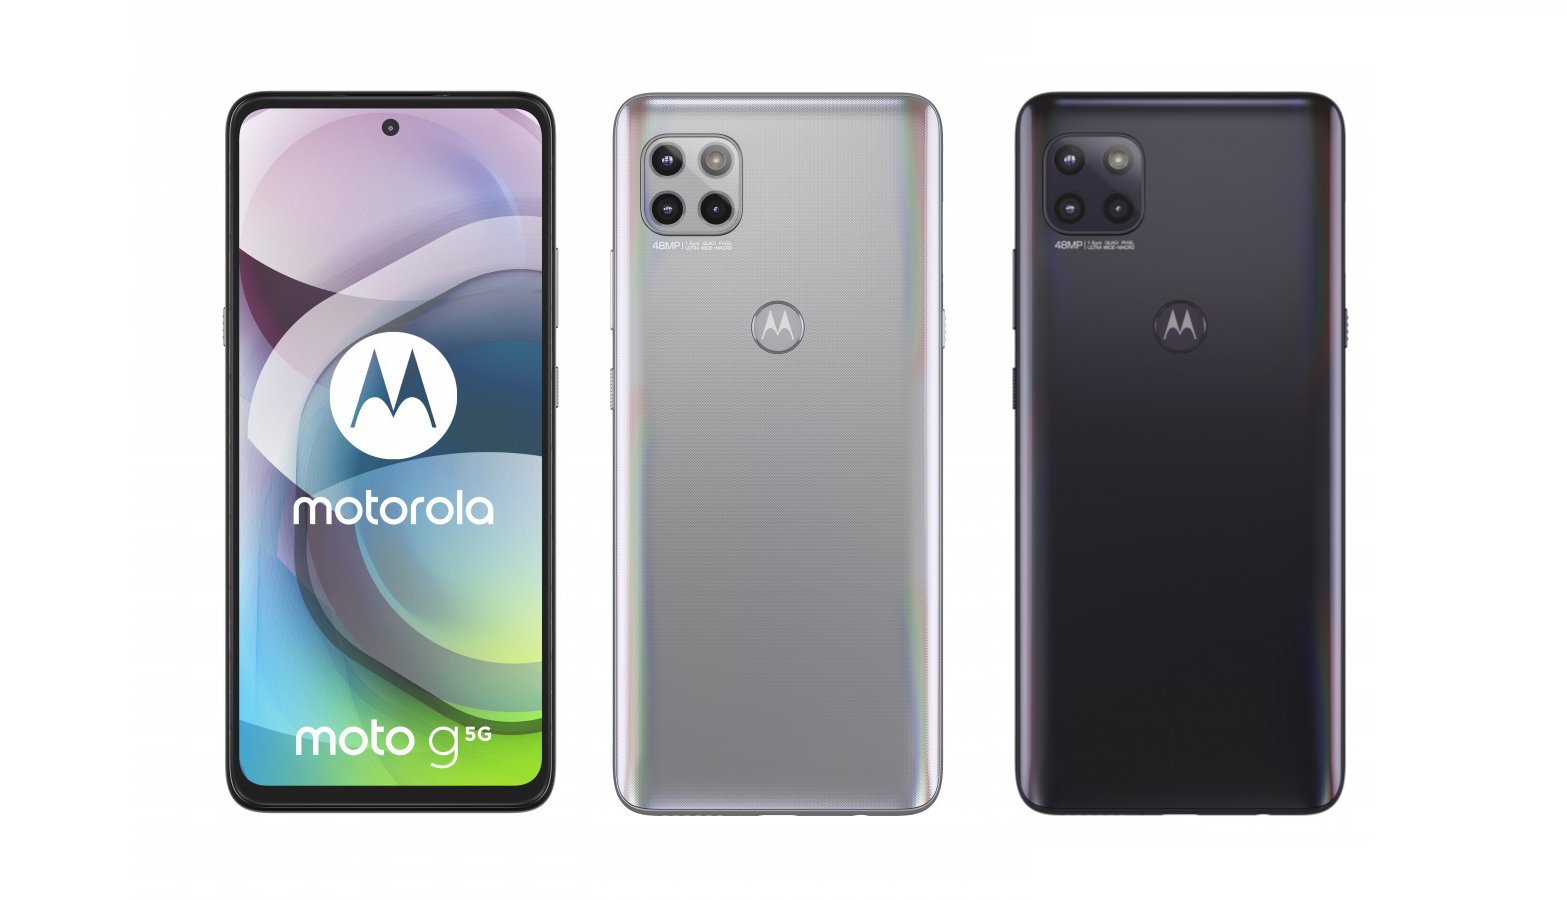 Moto G 5G: Motorola launches a mid-range smartphone with a Snapdragon 750G  SoC, a 90 Hz display and a 5,000 mAh battery - NotebookCheck.net News